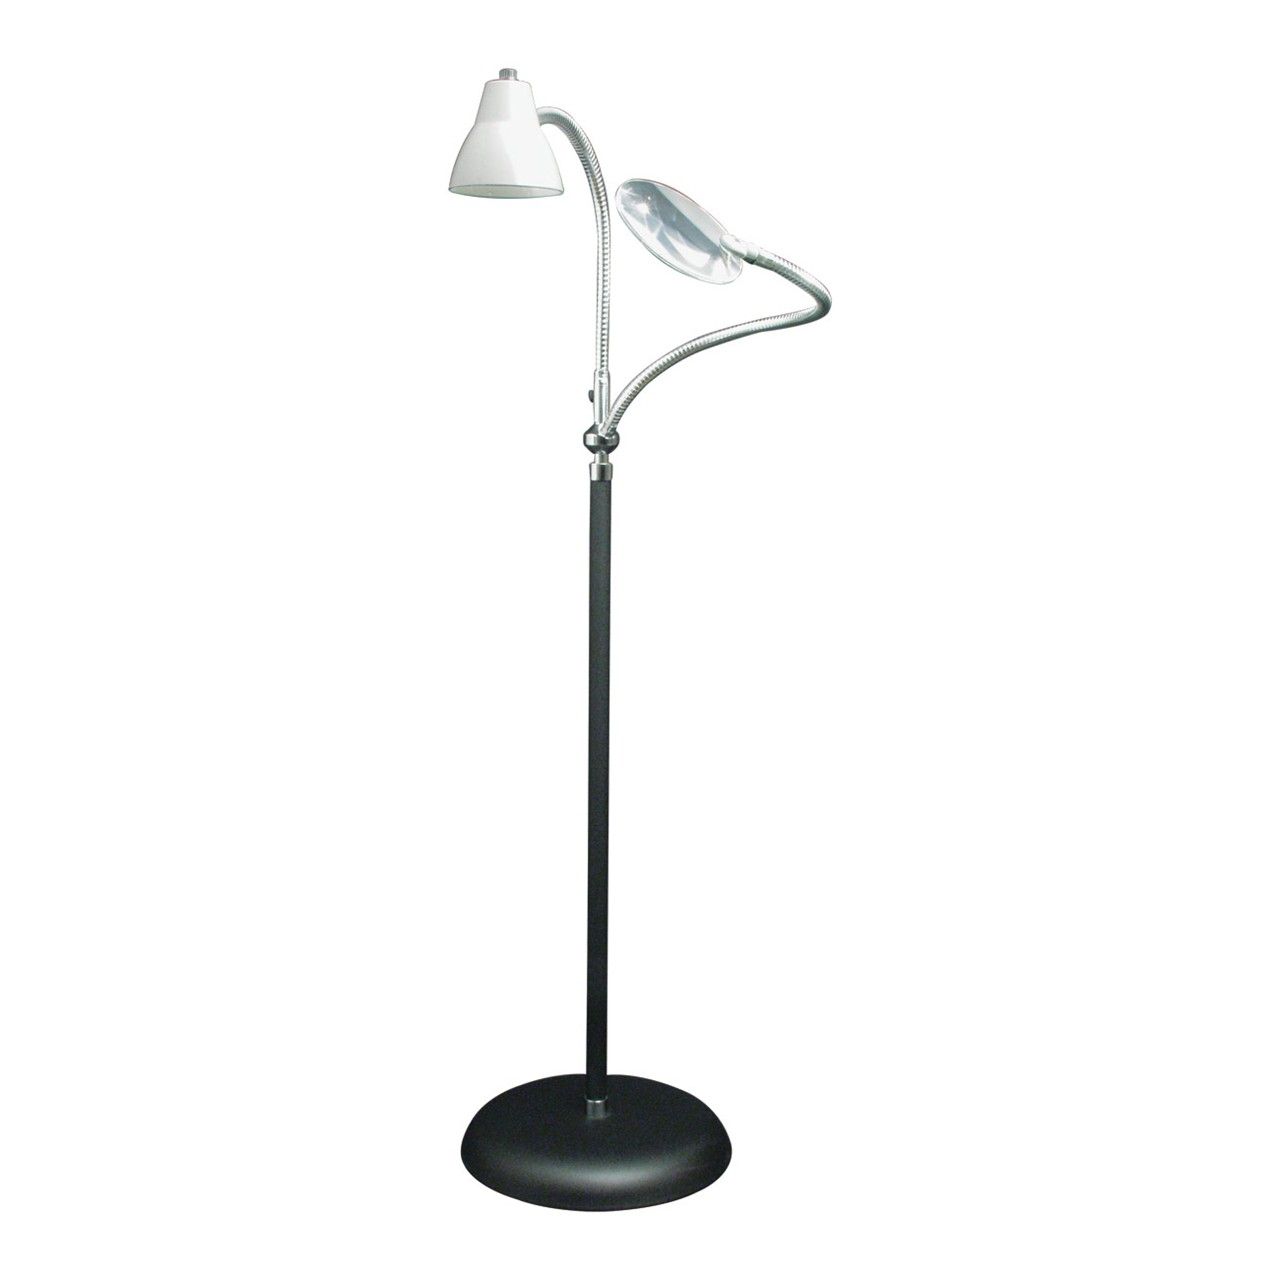 Trendy 2 Arm Combination Floor Lamp And 2x Magnifier Pertaining To 2 Arm Standing Lamps (View 10 of 10)